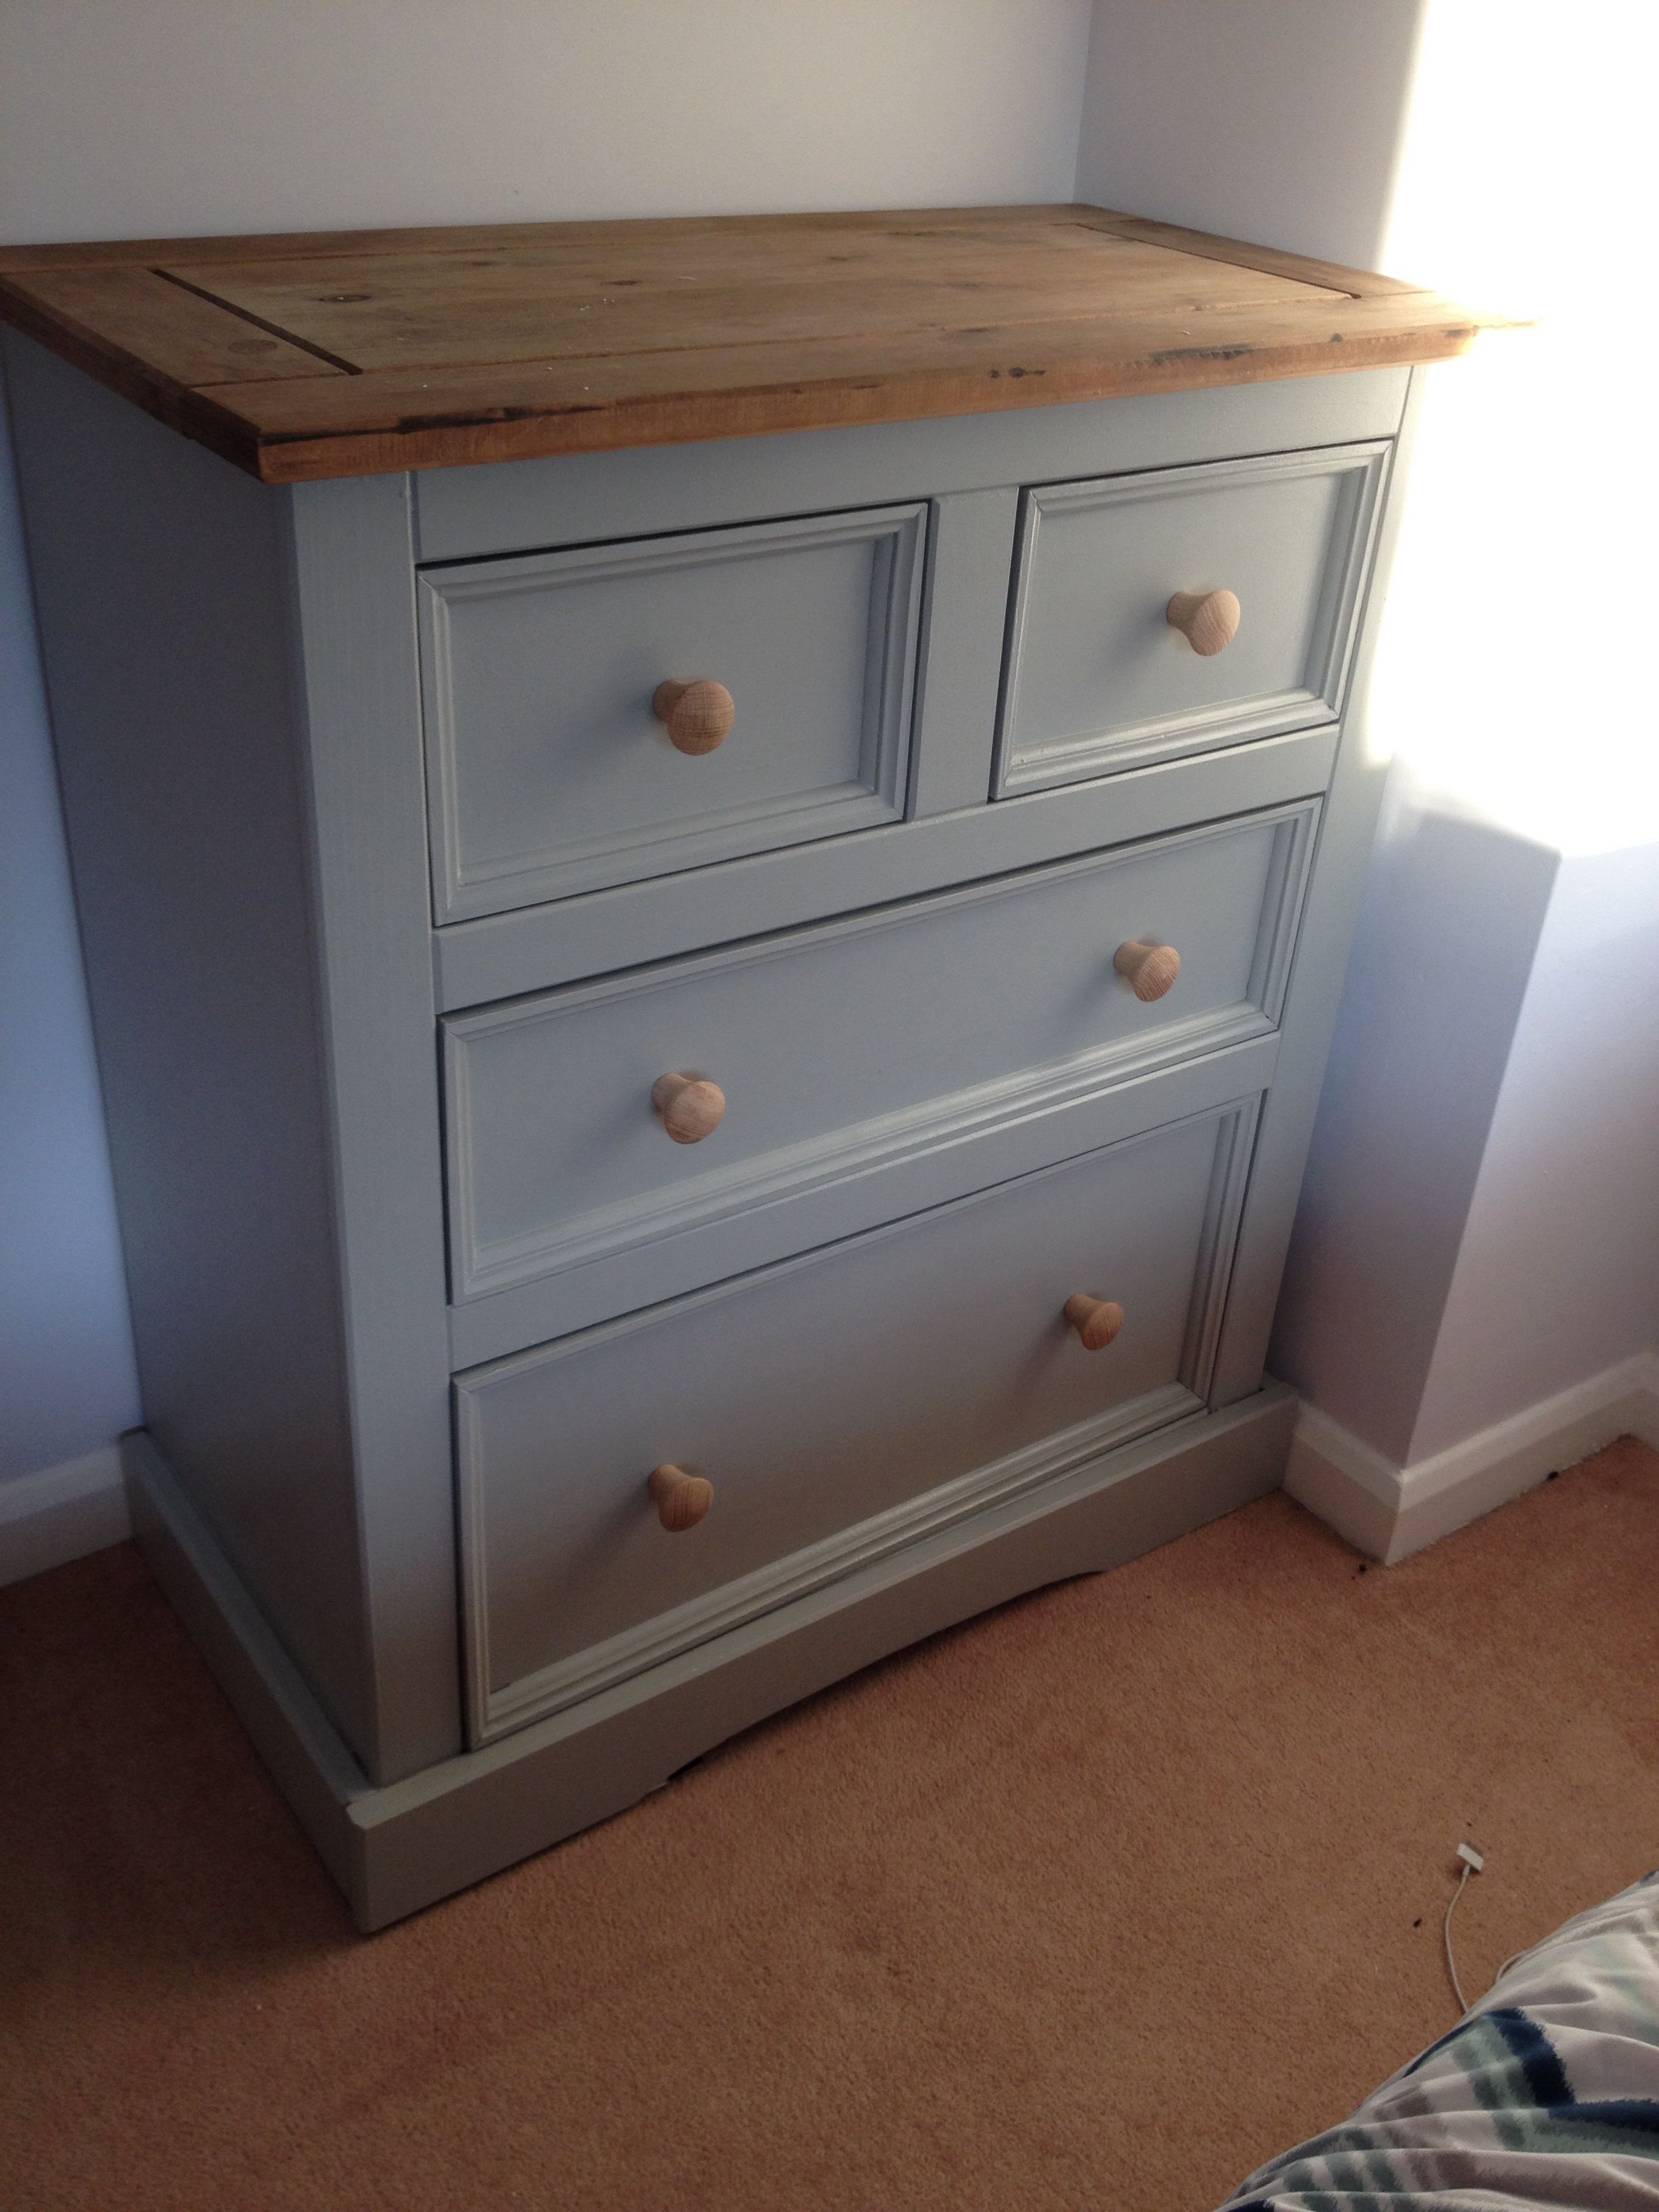 Unit Painted In Farrow And Ball Lamp Room Grey | A A Buy Now Regarding Rustic Black &amp; Zebra Pine Sideboards (View 29 of 30)